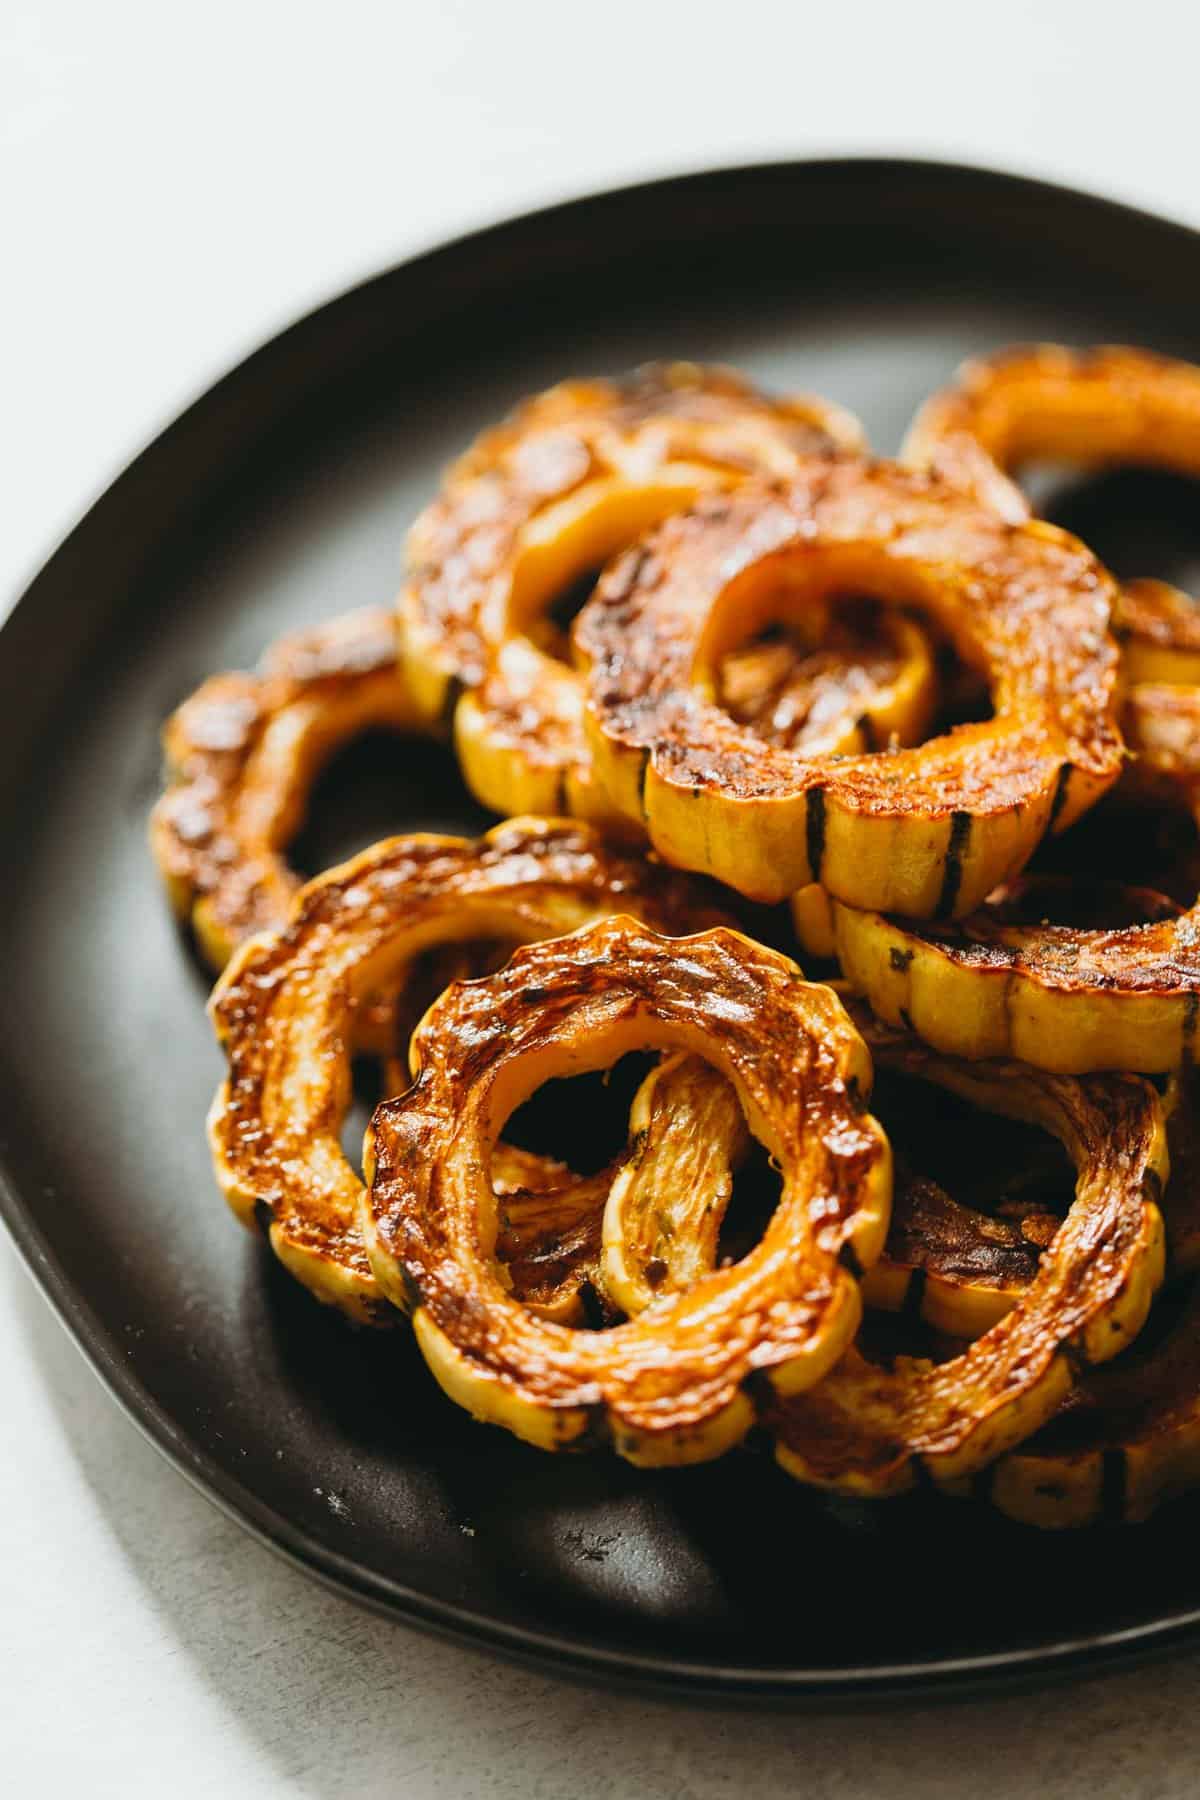 Delicata squash is an easy side dish to make and incredibly sweet like candy! If you've never had it before, now is your time to try this unique and delicious squash! #squash #delicatasquash #squashrecipe #roastedsquash